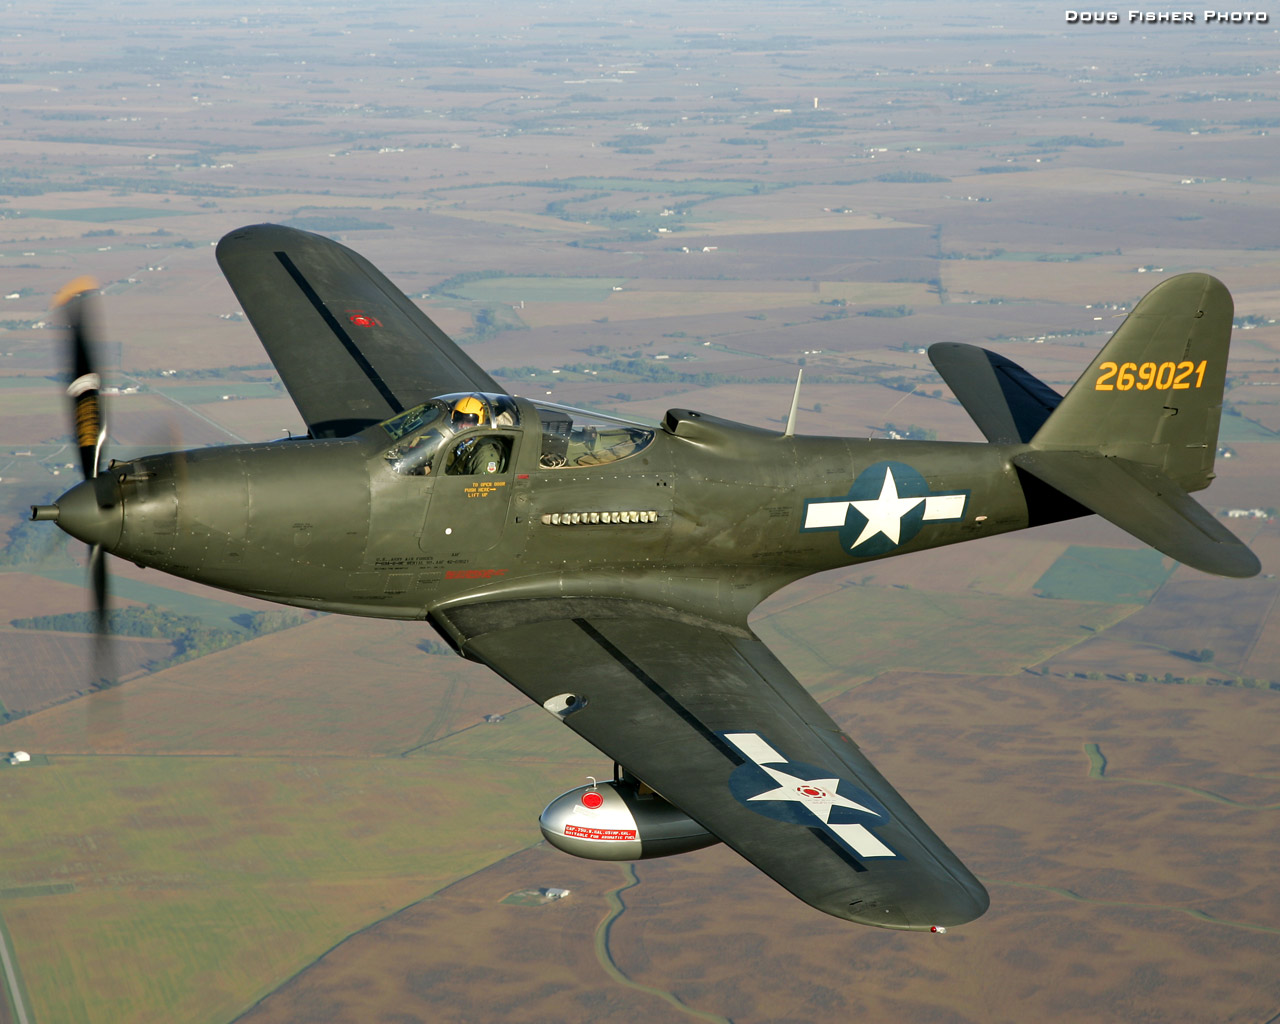 John Bagley is the owner and operator of this rare Bell P-63C-5 Kingcobra (S/N 43-11223). Photo by Doug Fisher